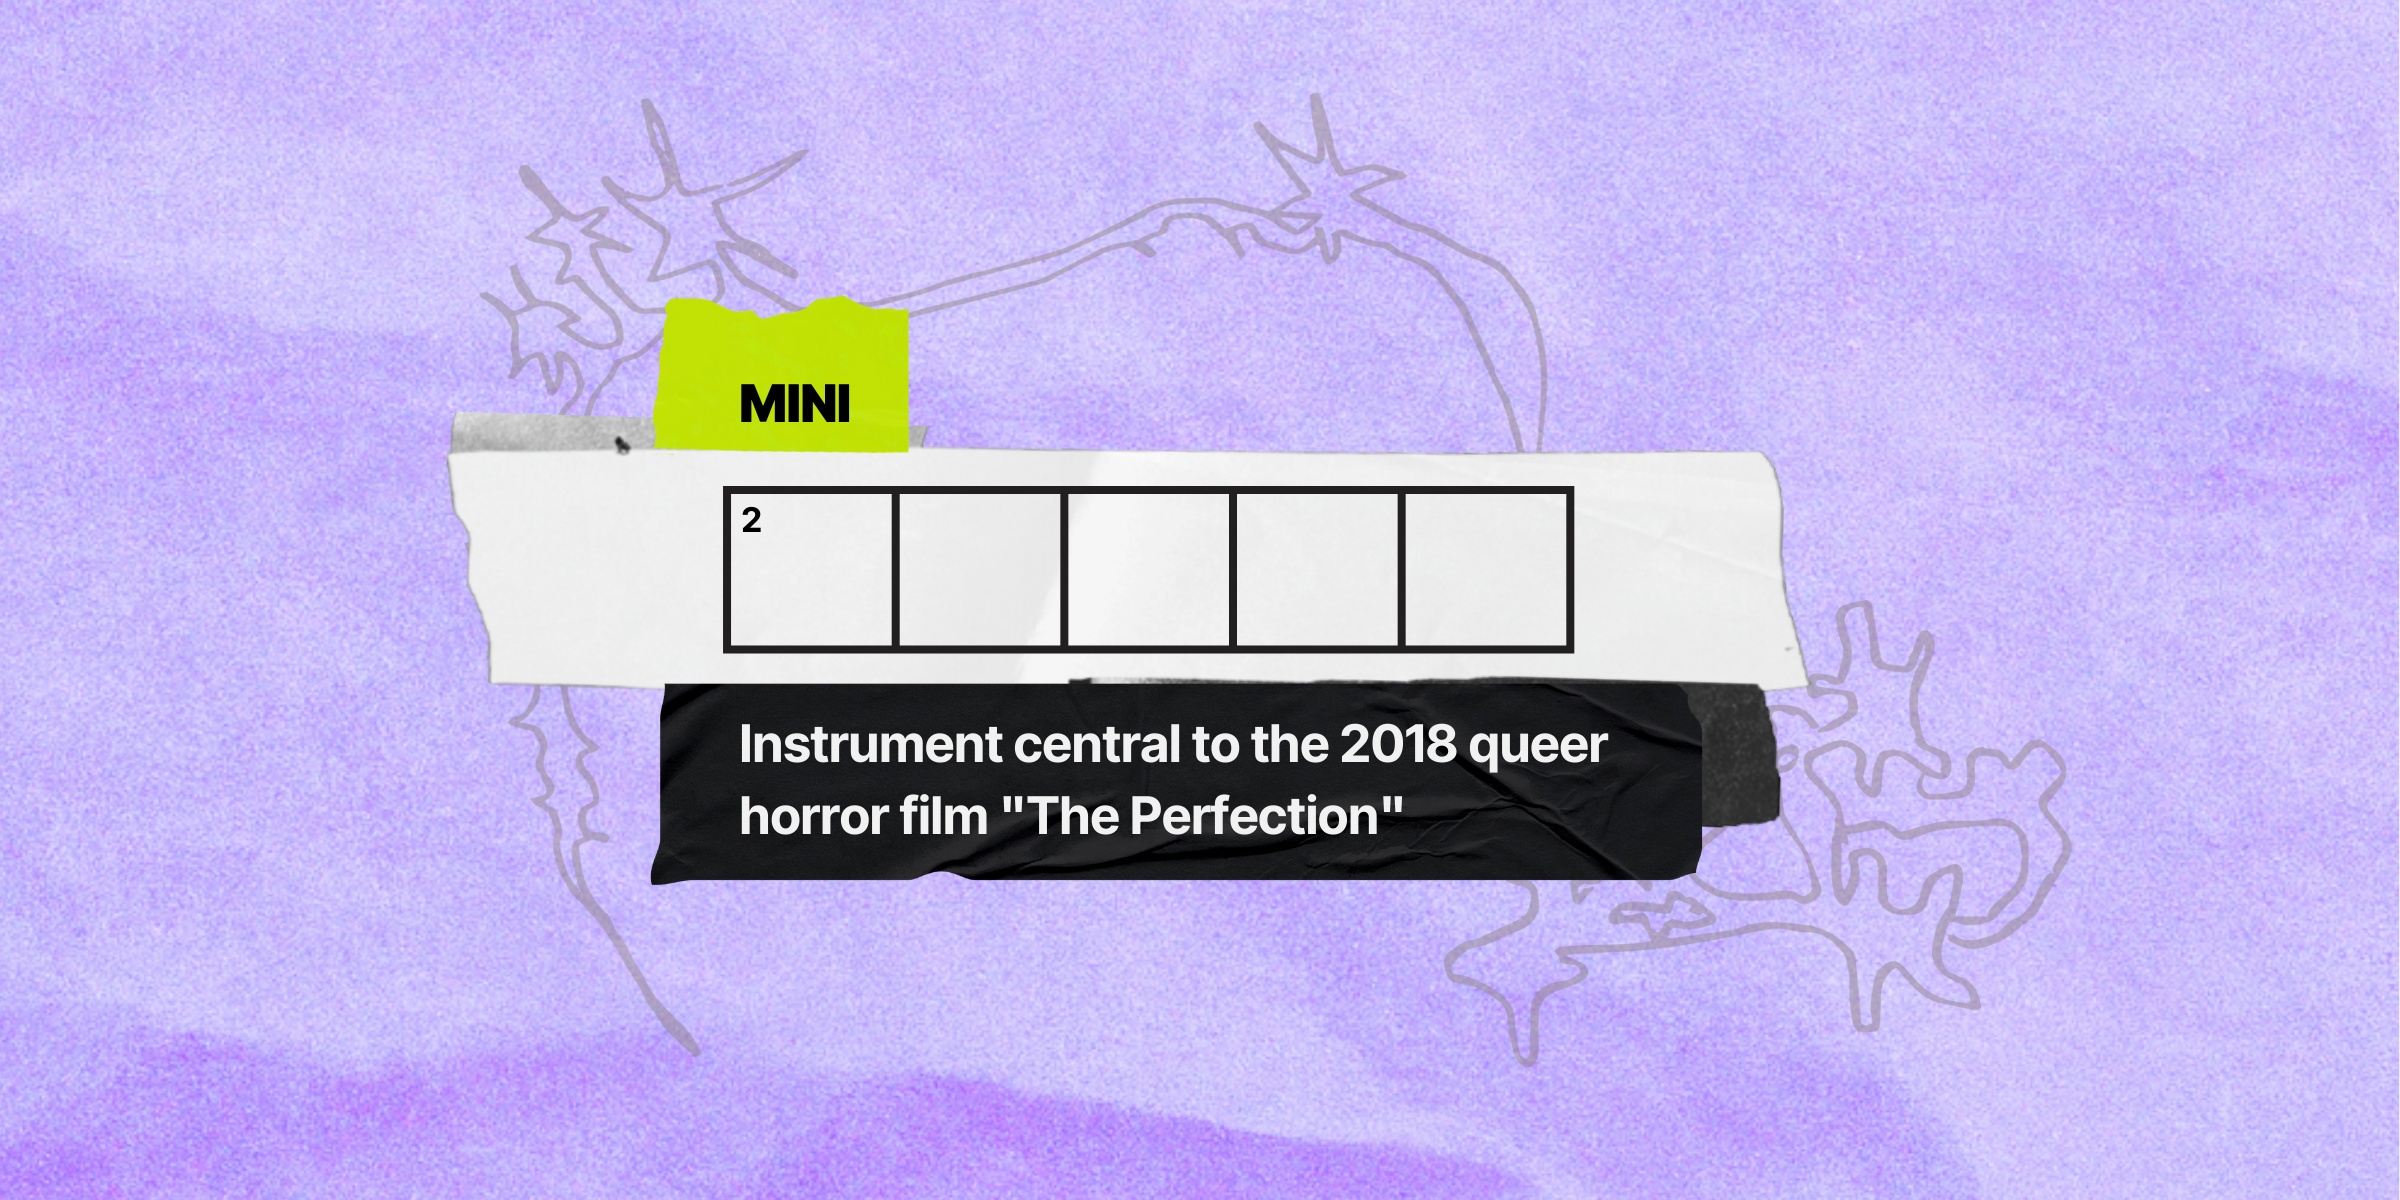 2 down / 5 letters / clue: Instrument central to the 2018 queer horror film "The Perfection"